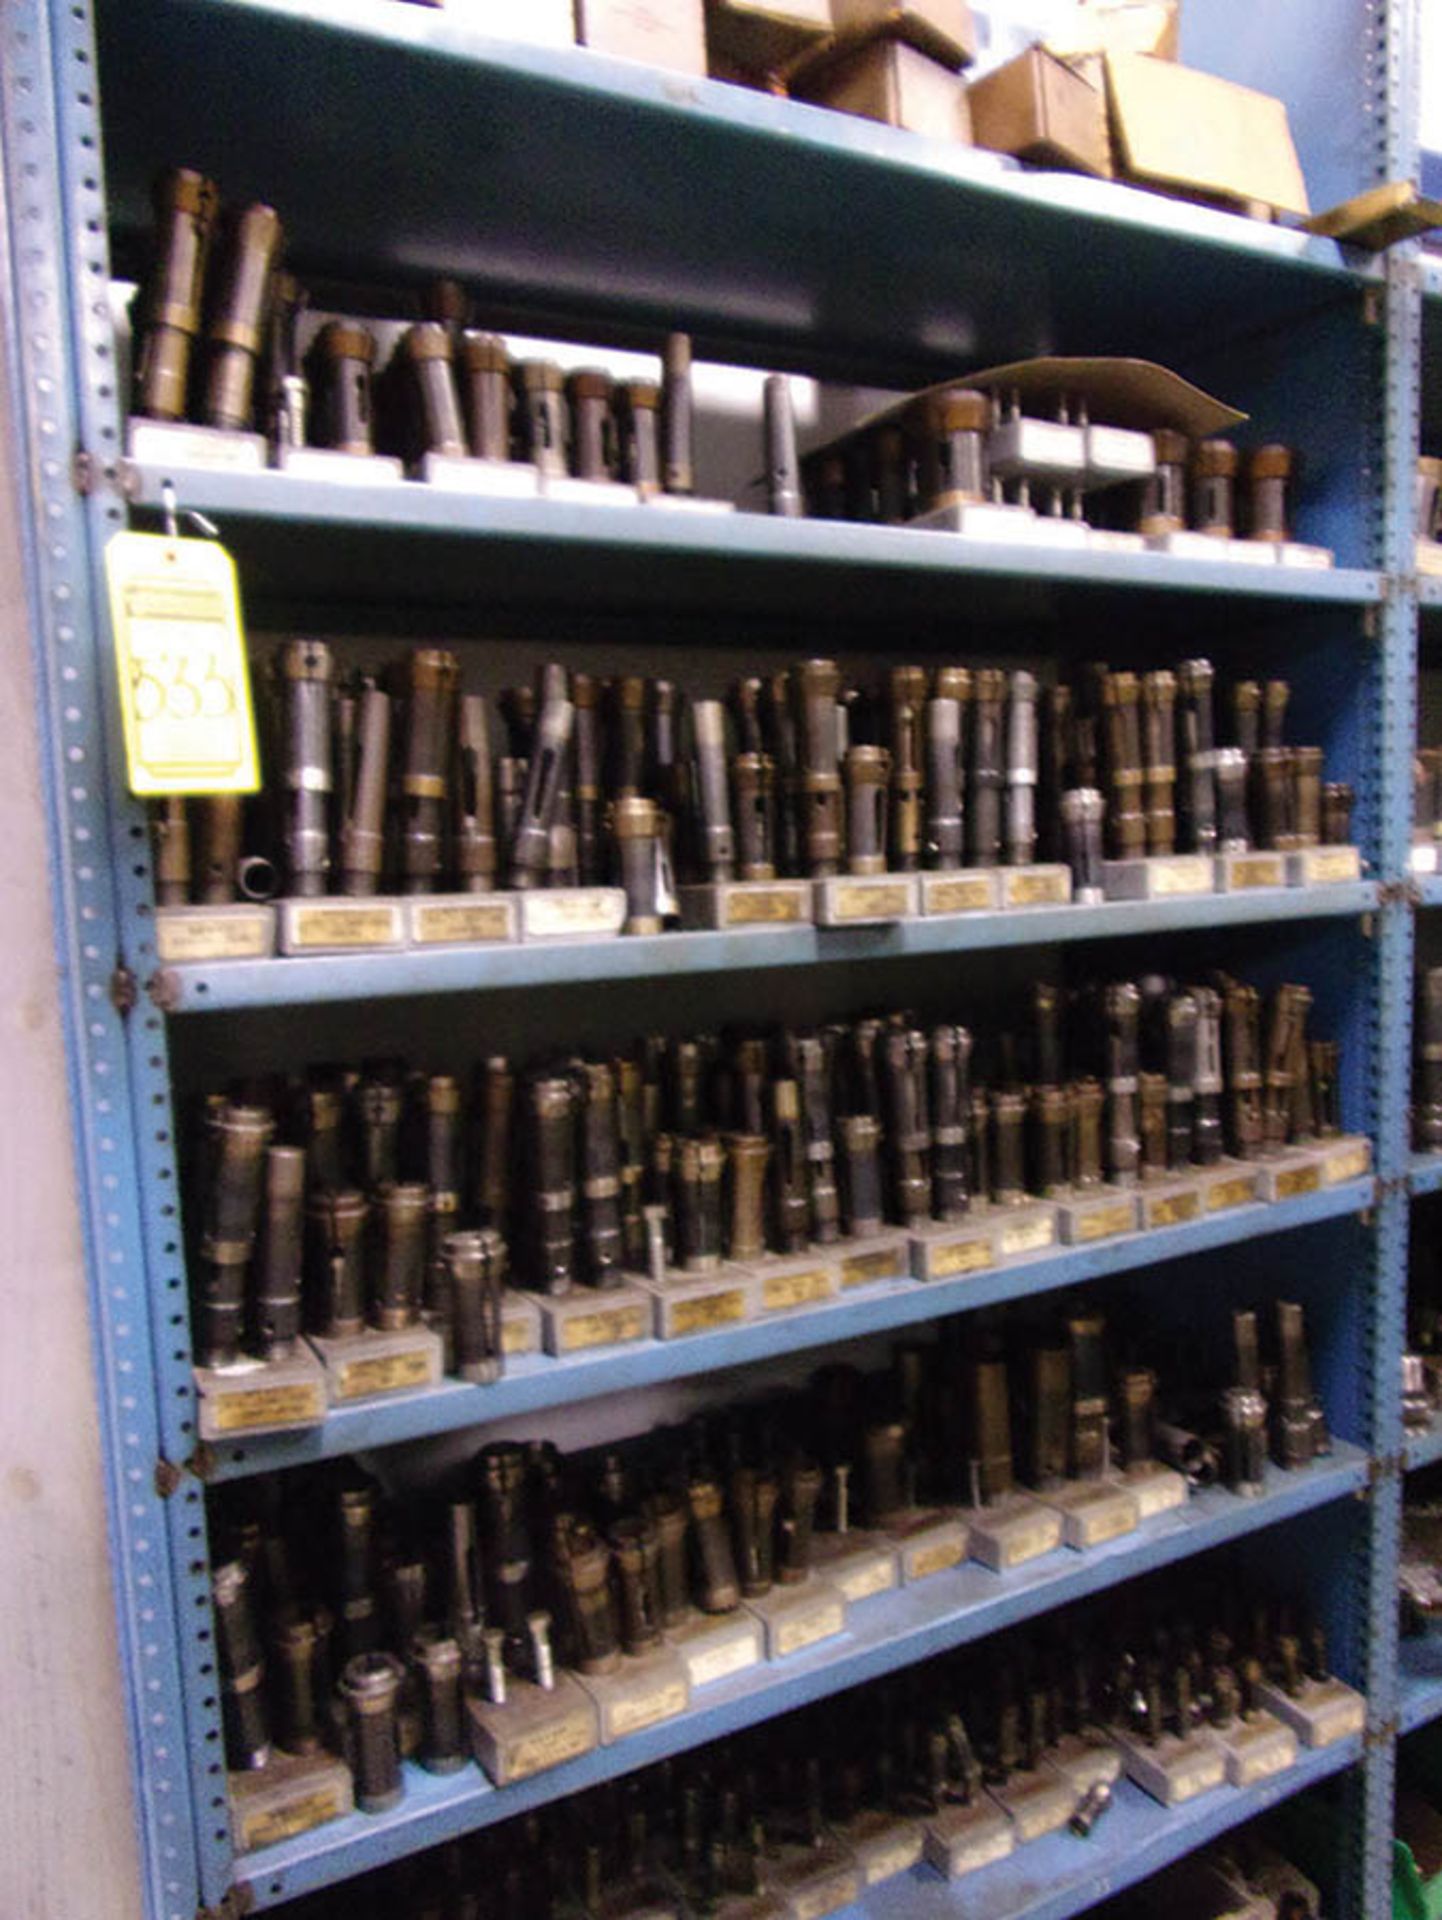 (3) SECTION SHELF UNIT WITH ASSORTED SCREW MACHINE COLLETS & SPARE PARTS